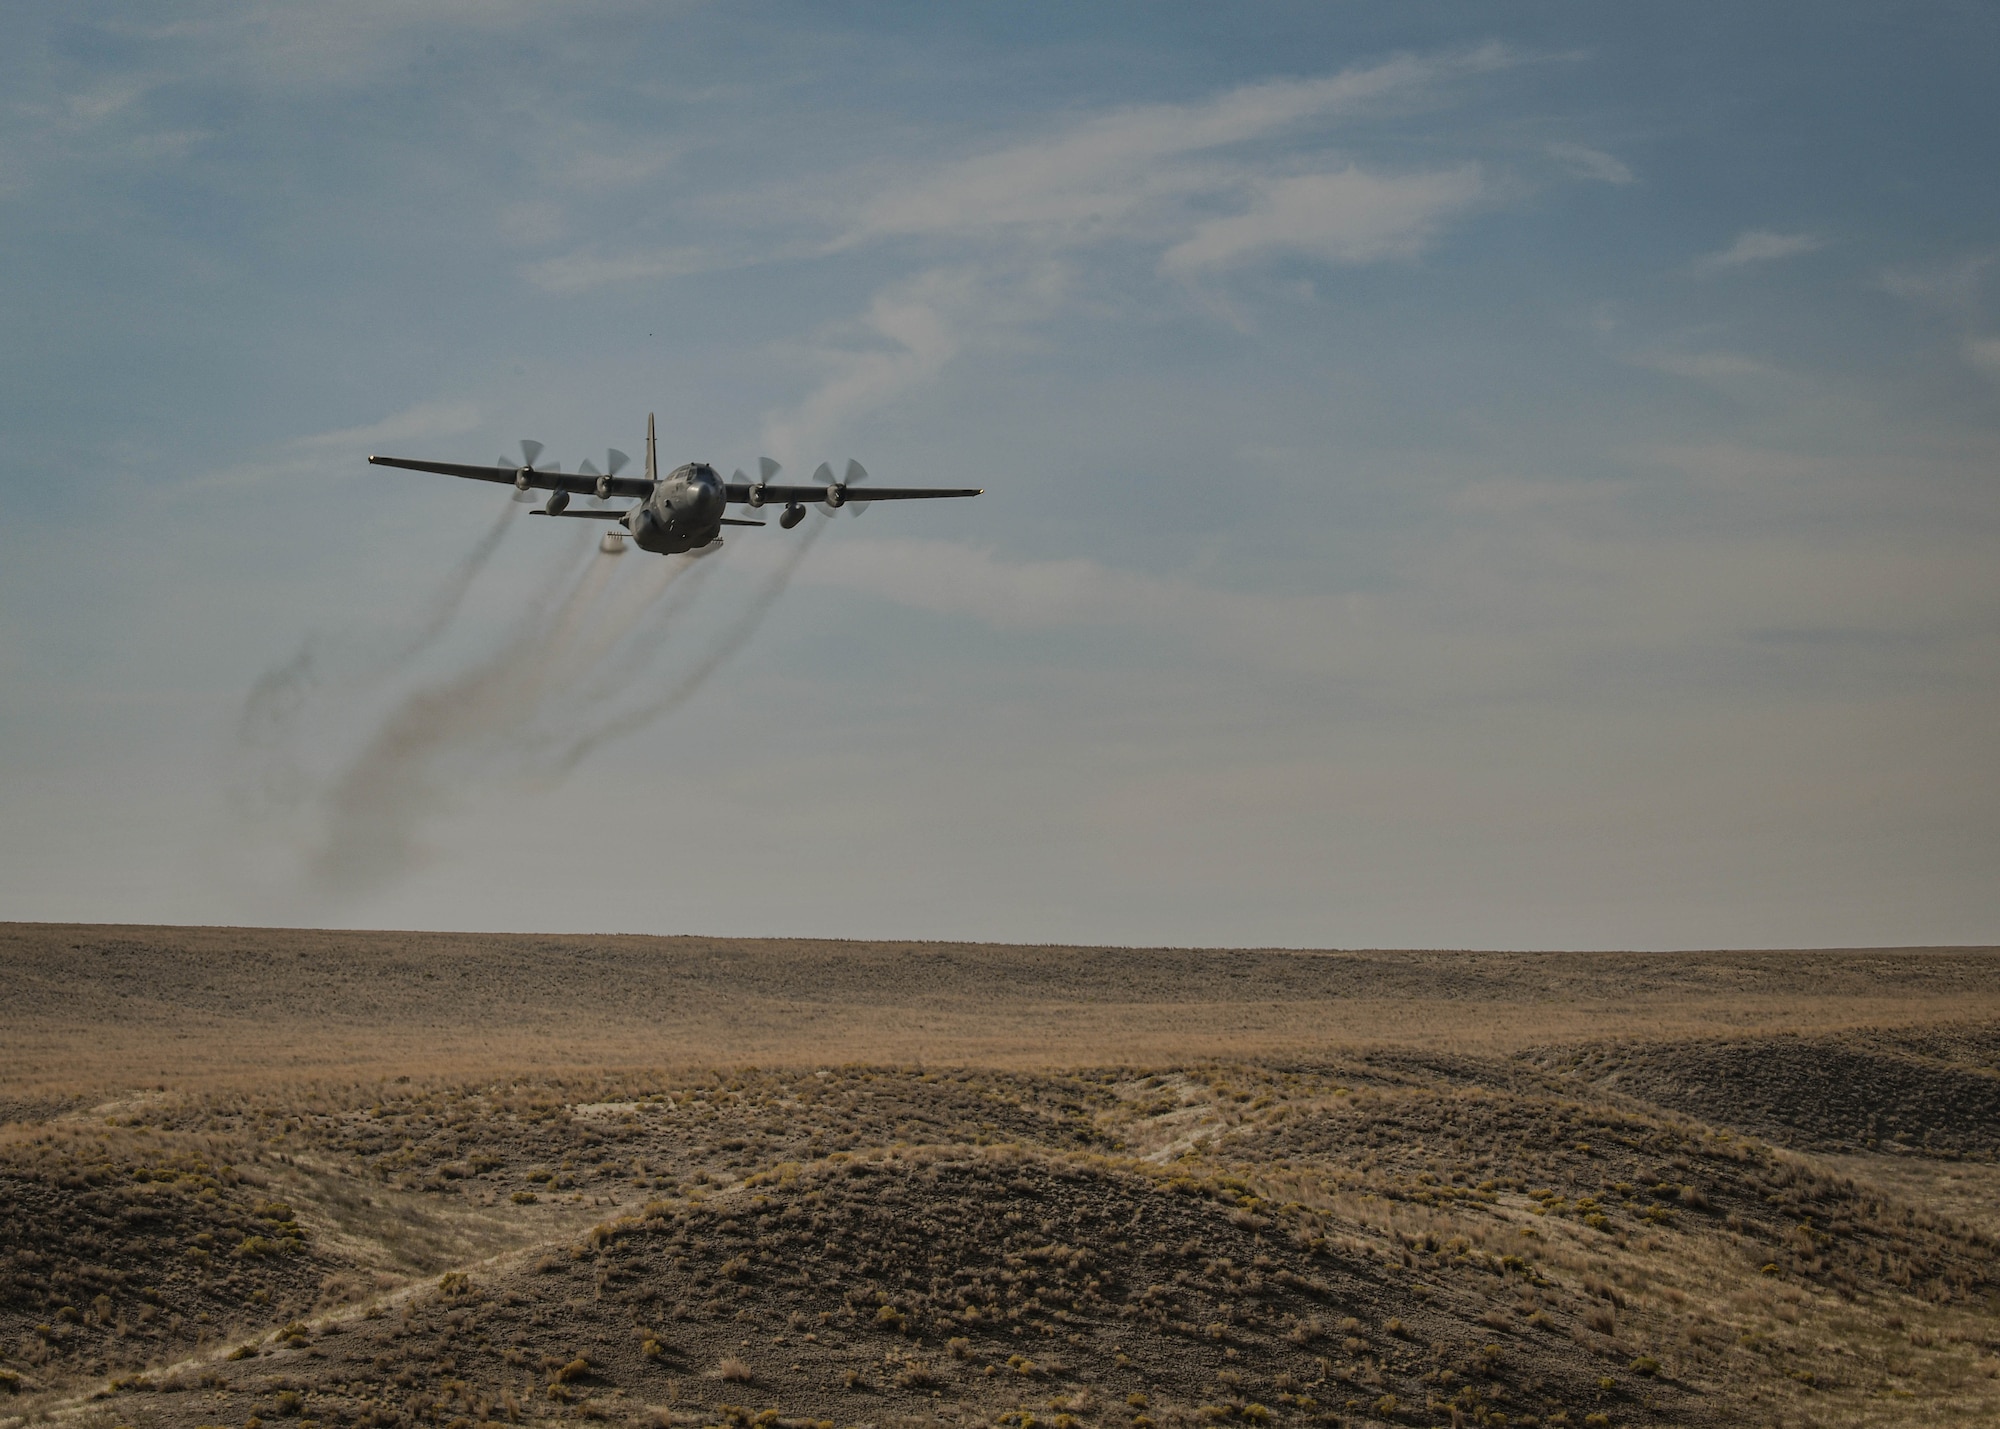 Reserve Citizen Airmen from Youngstown Air Reserve Station, Ohio, traveled to Mountain Home AFB to conduct aerial spray operations to combat the growth of cheatgrass, an invasive winter annual.